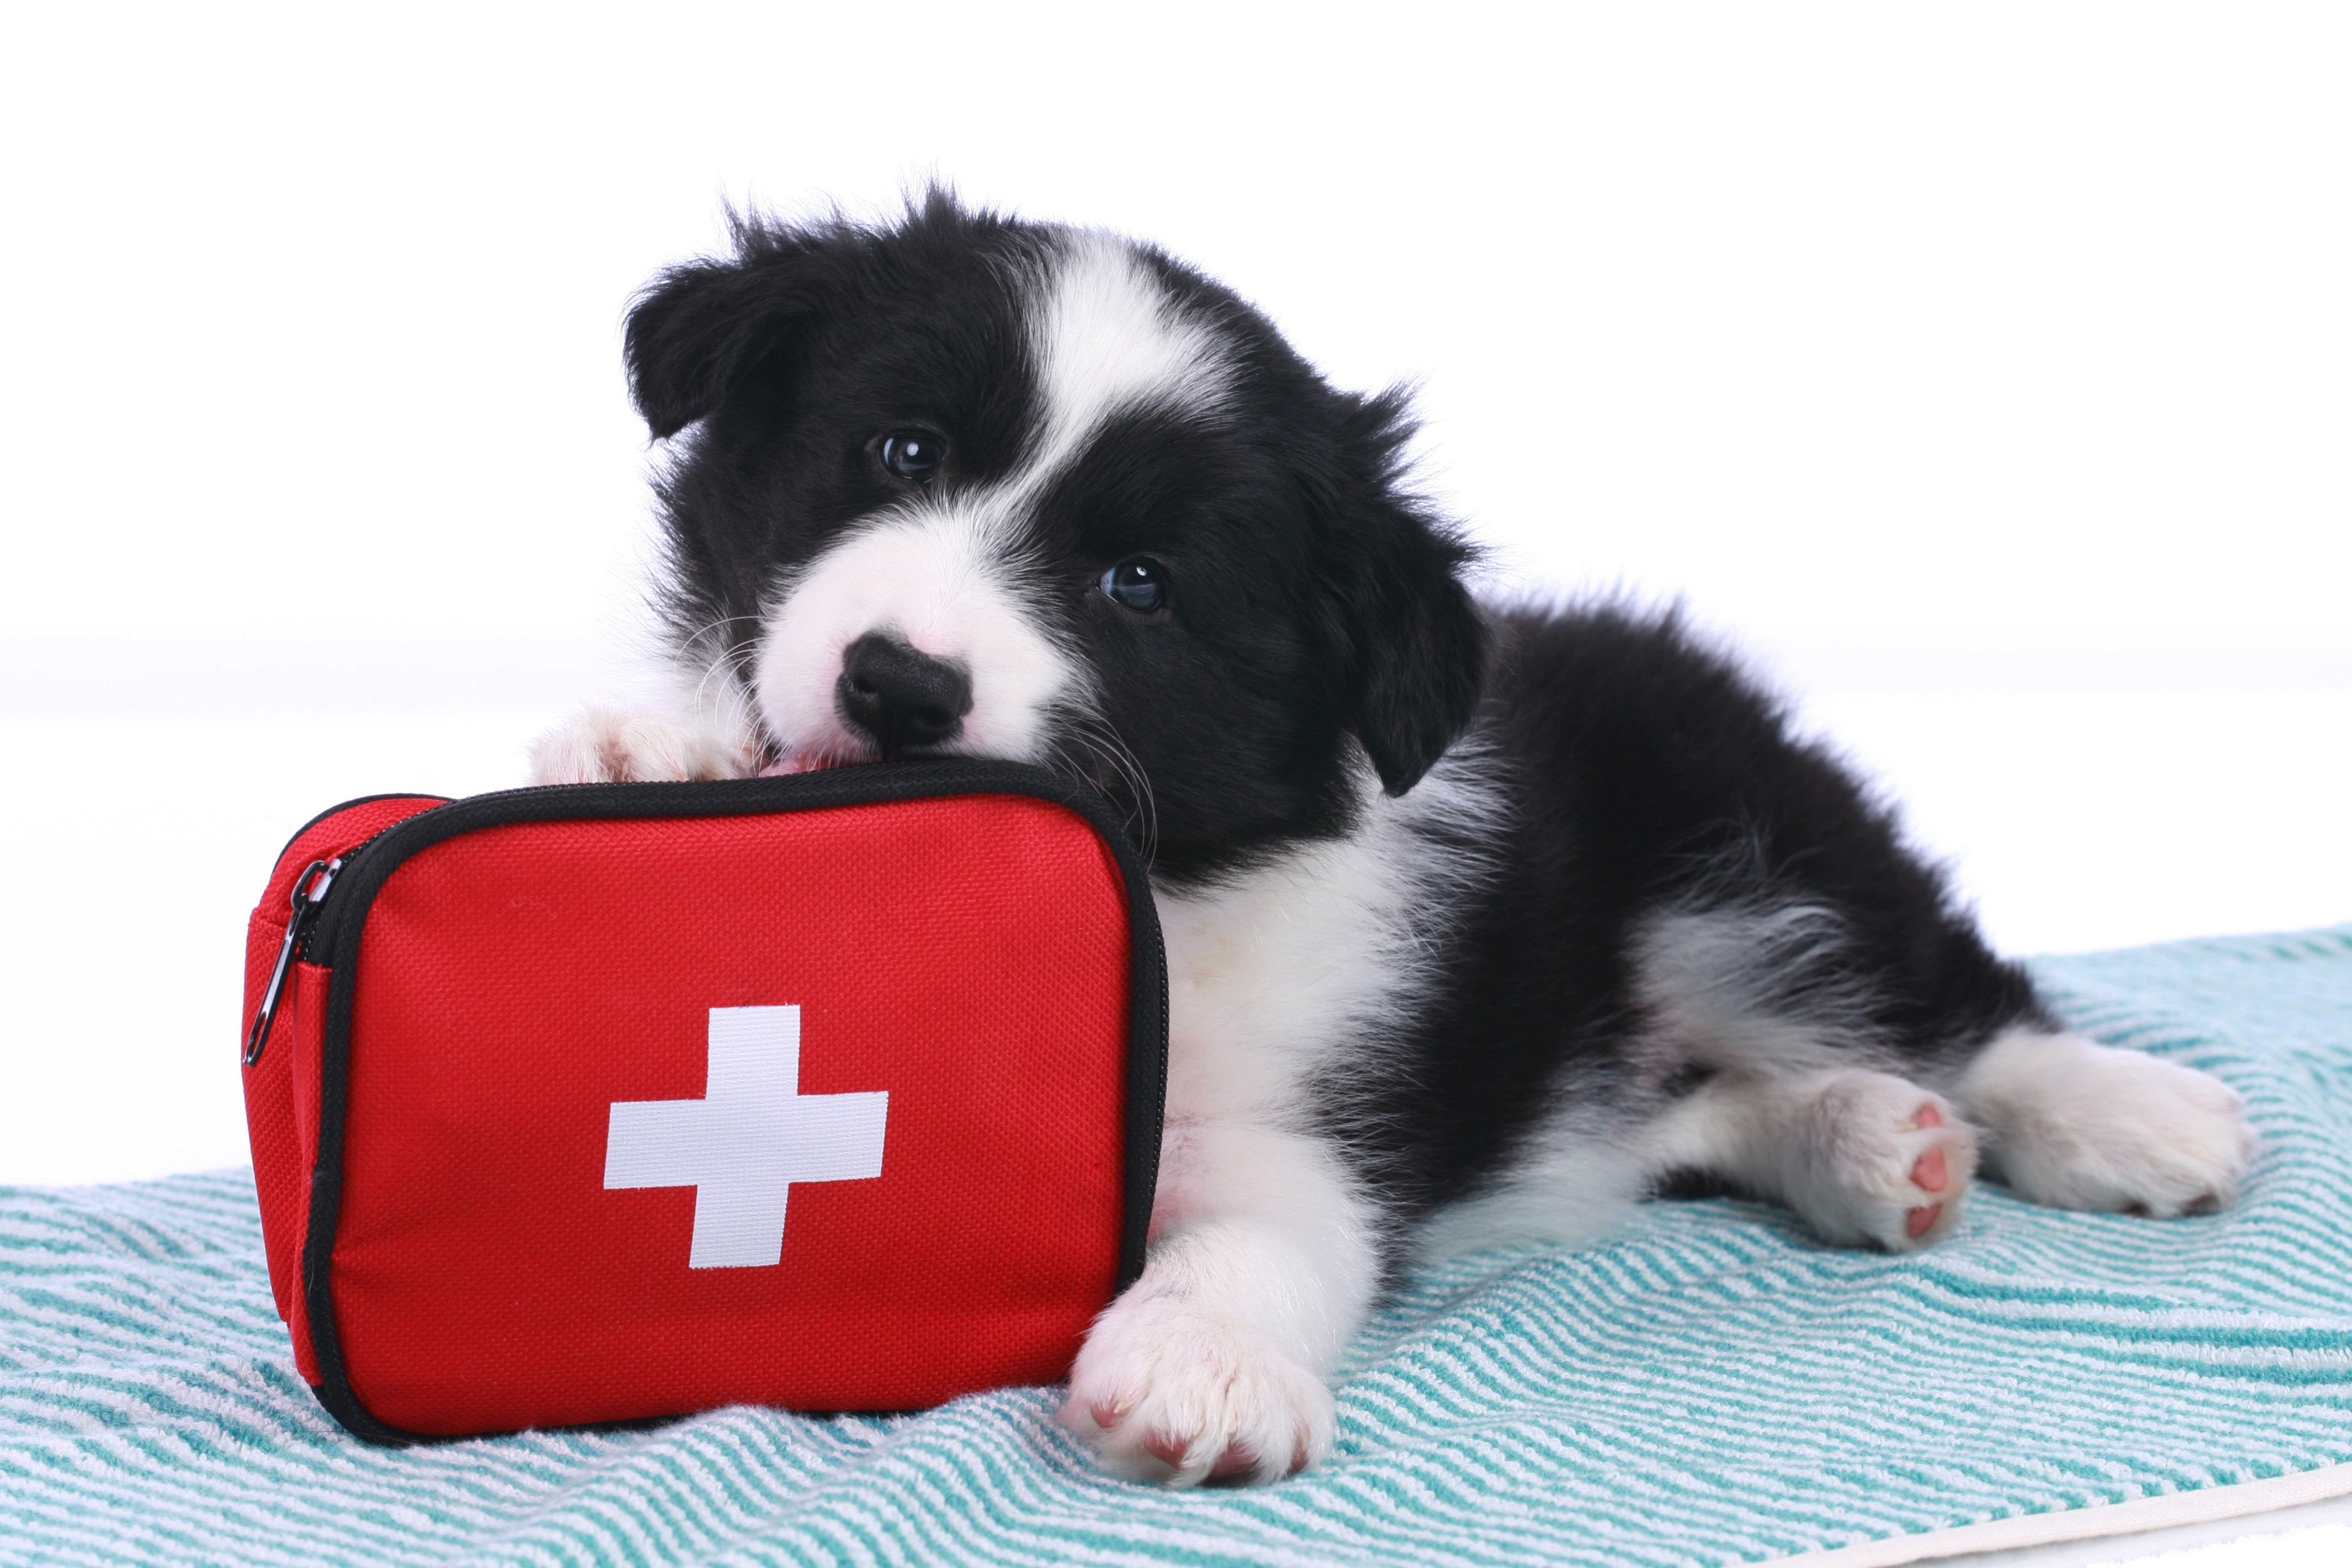 A Pet Emergency Guide: Prepare and Prevent